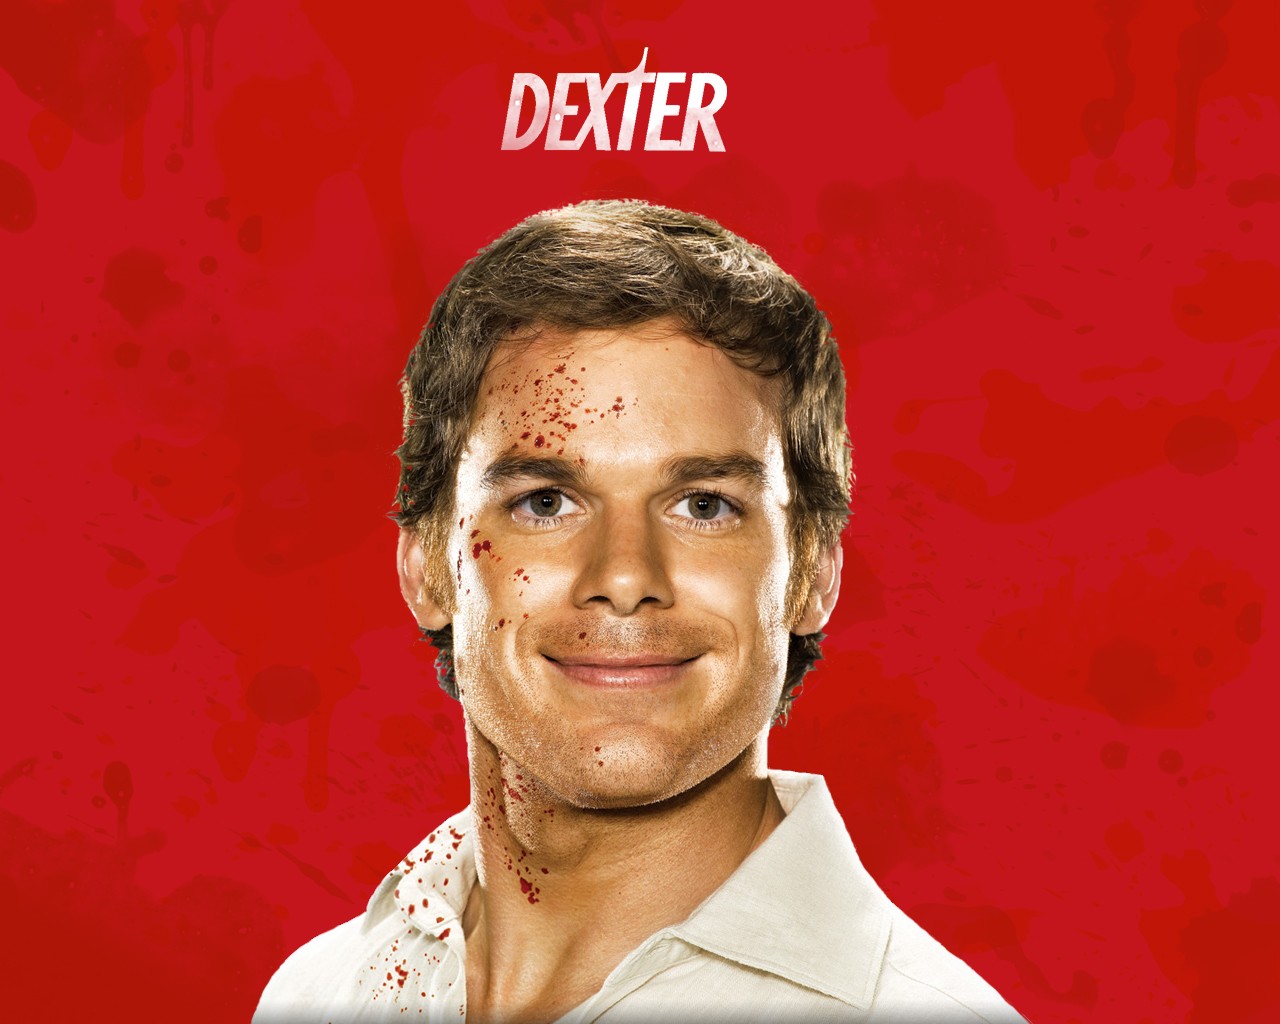 General 1280x1024 smiling criminal Dexter TV series blood spatter actor men face looking at viewer red background blood promotional